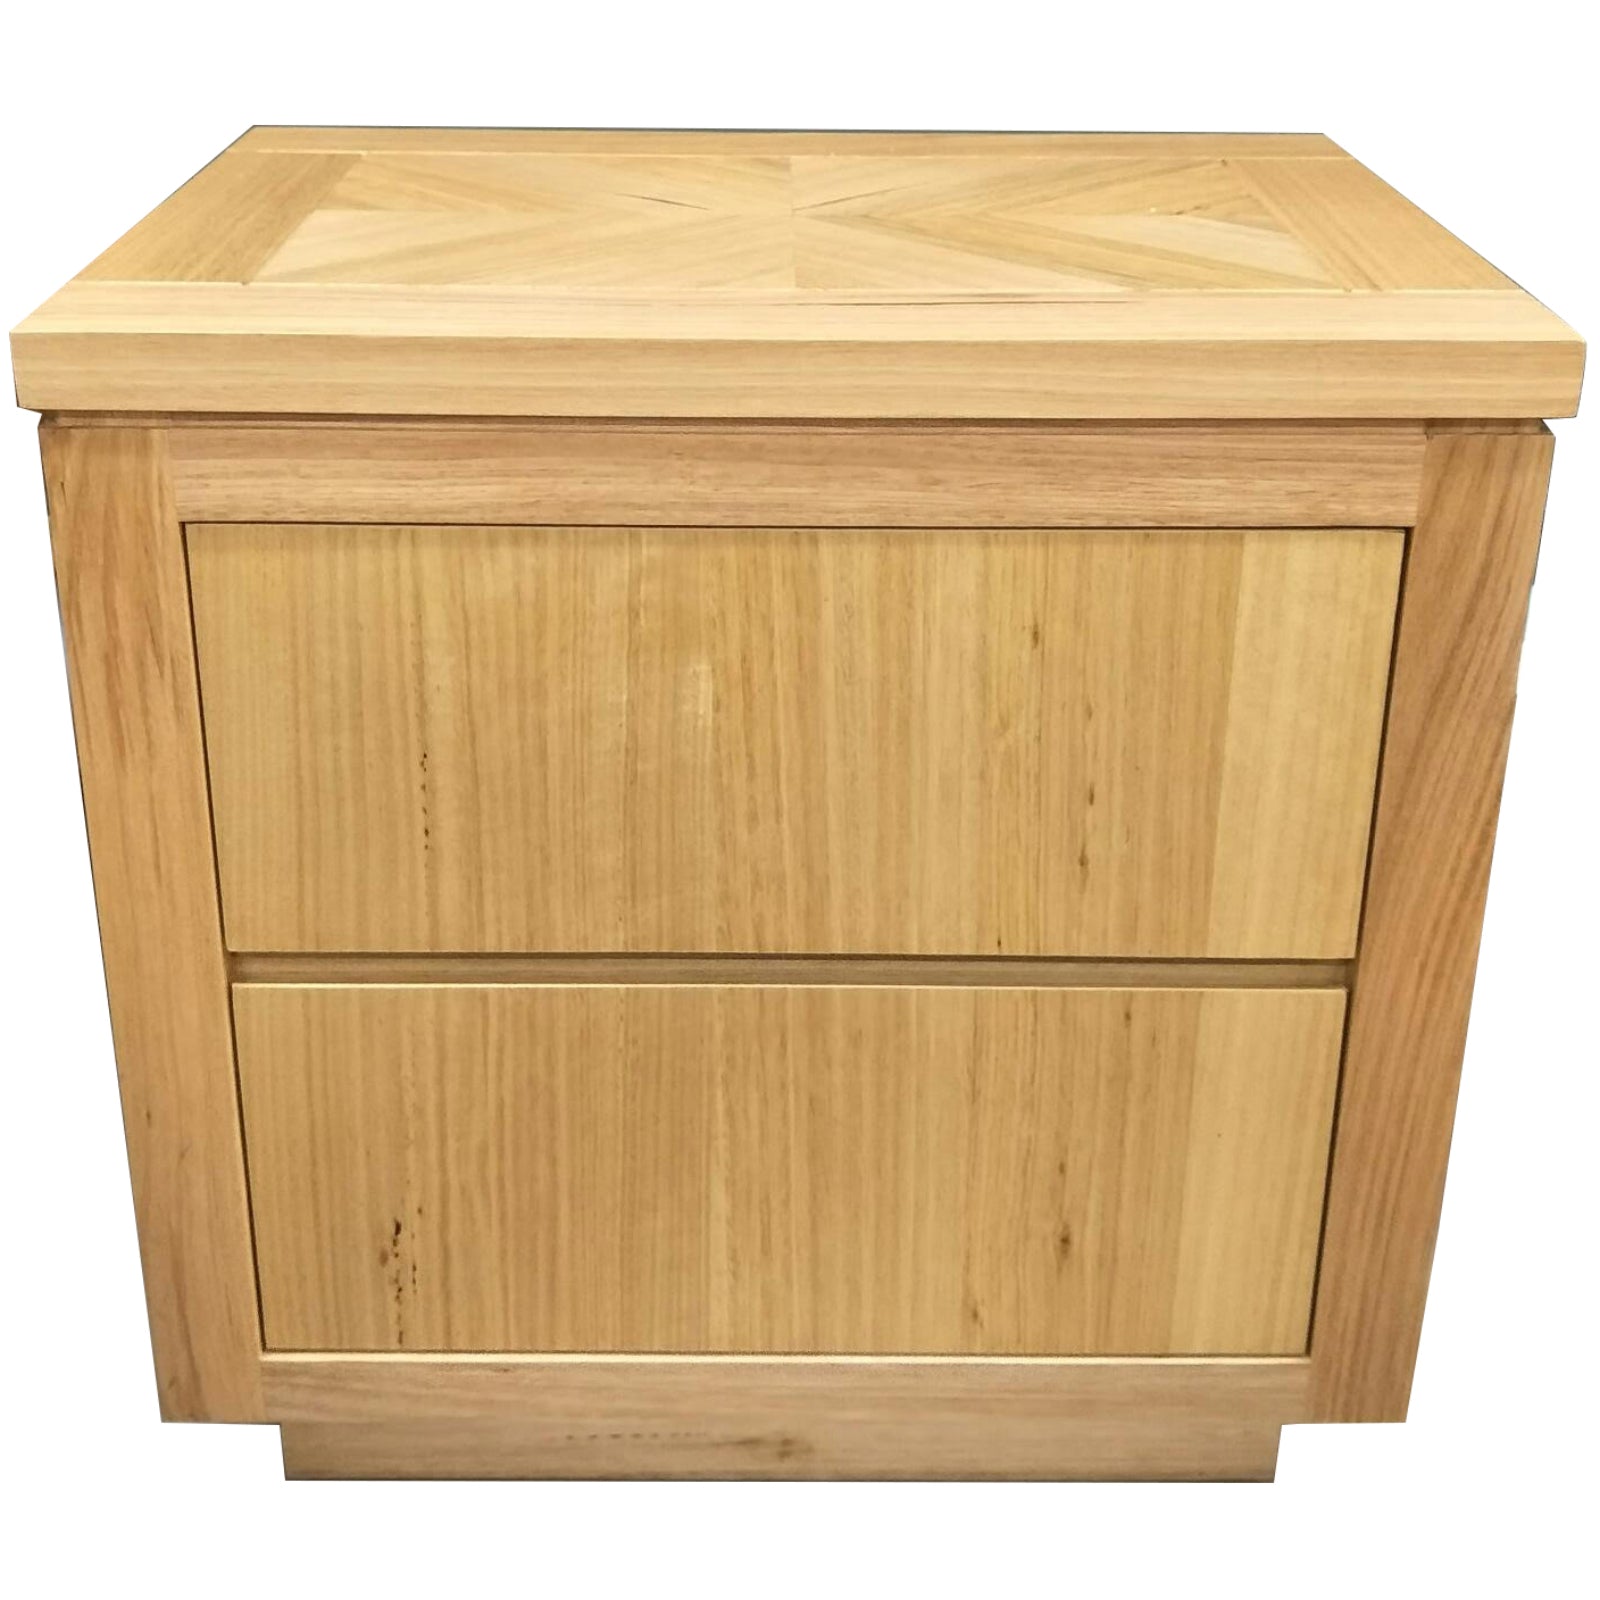 No Assembly Required! Bedside Table With Two Drawers - Timber